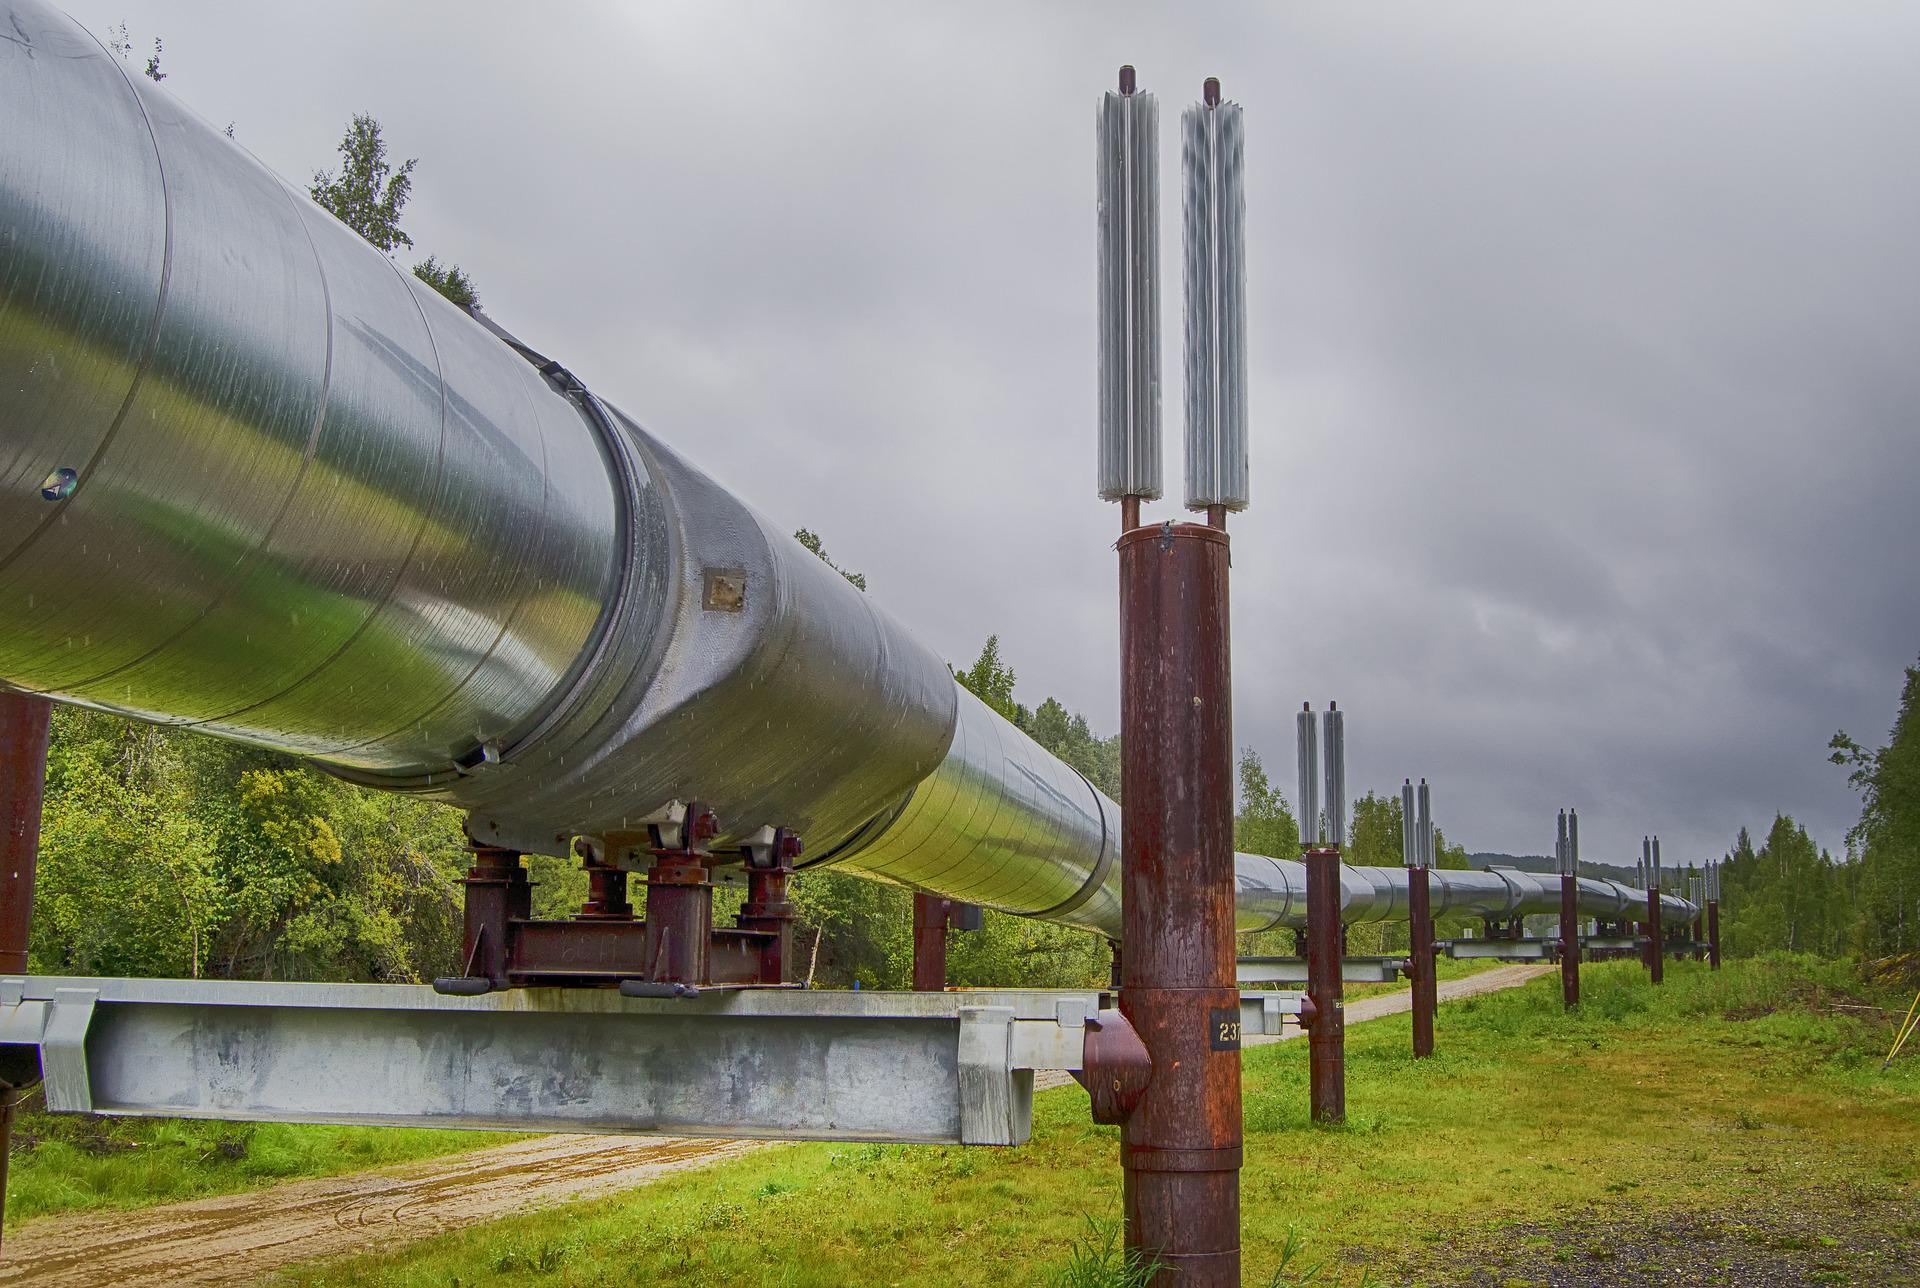 Morocco plans to build pipeline for Nigerian natural gas